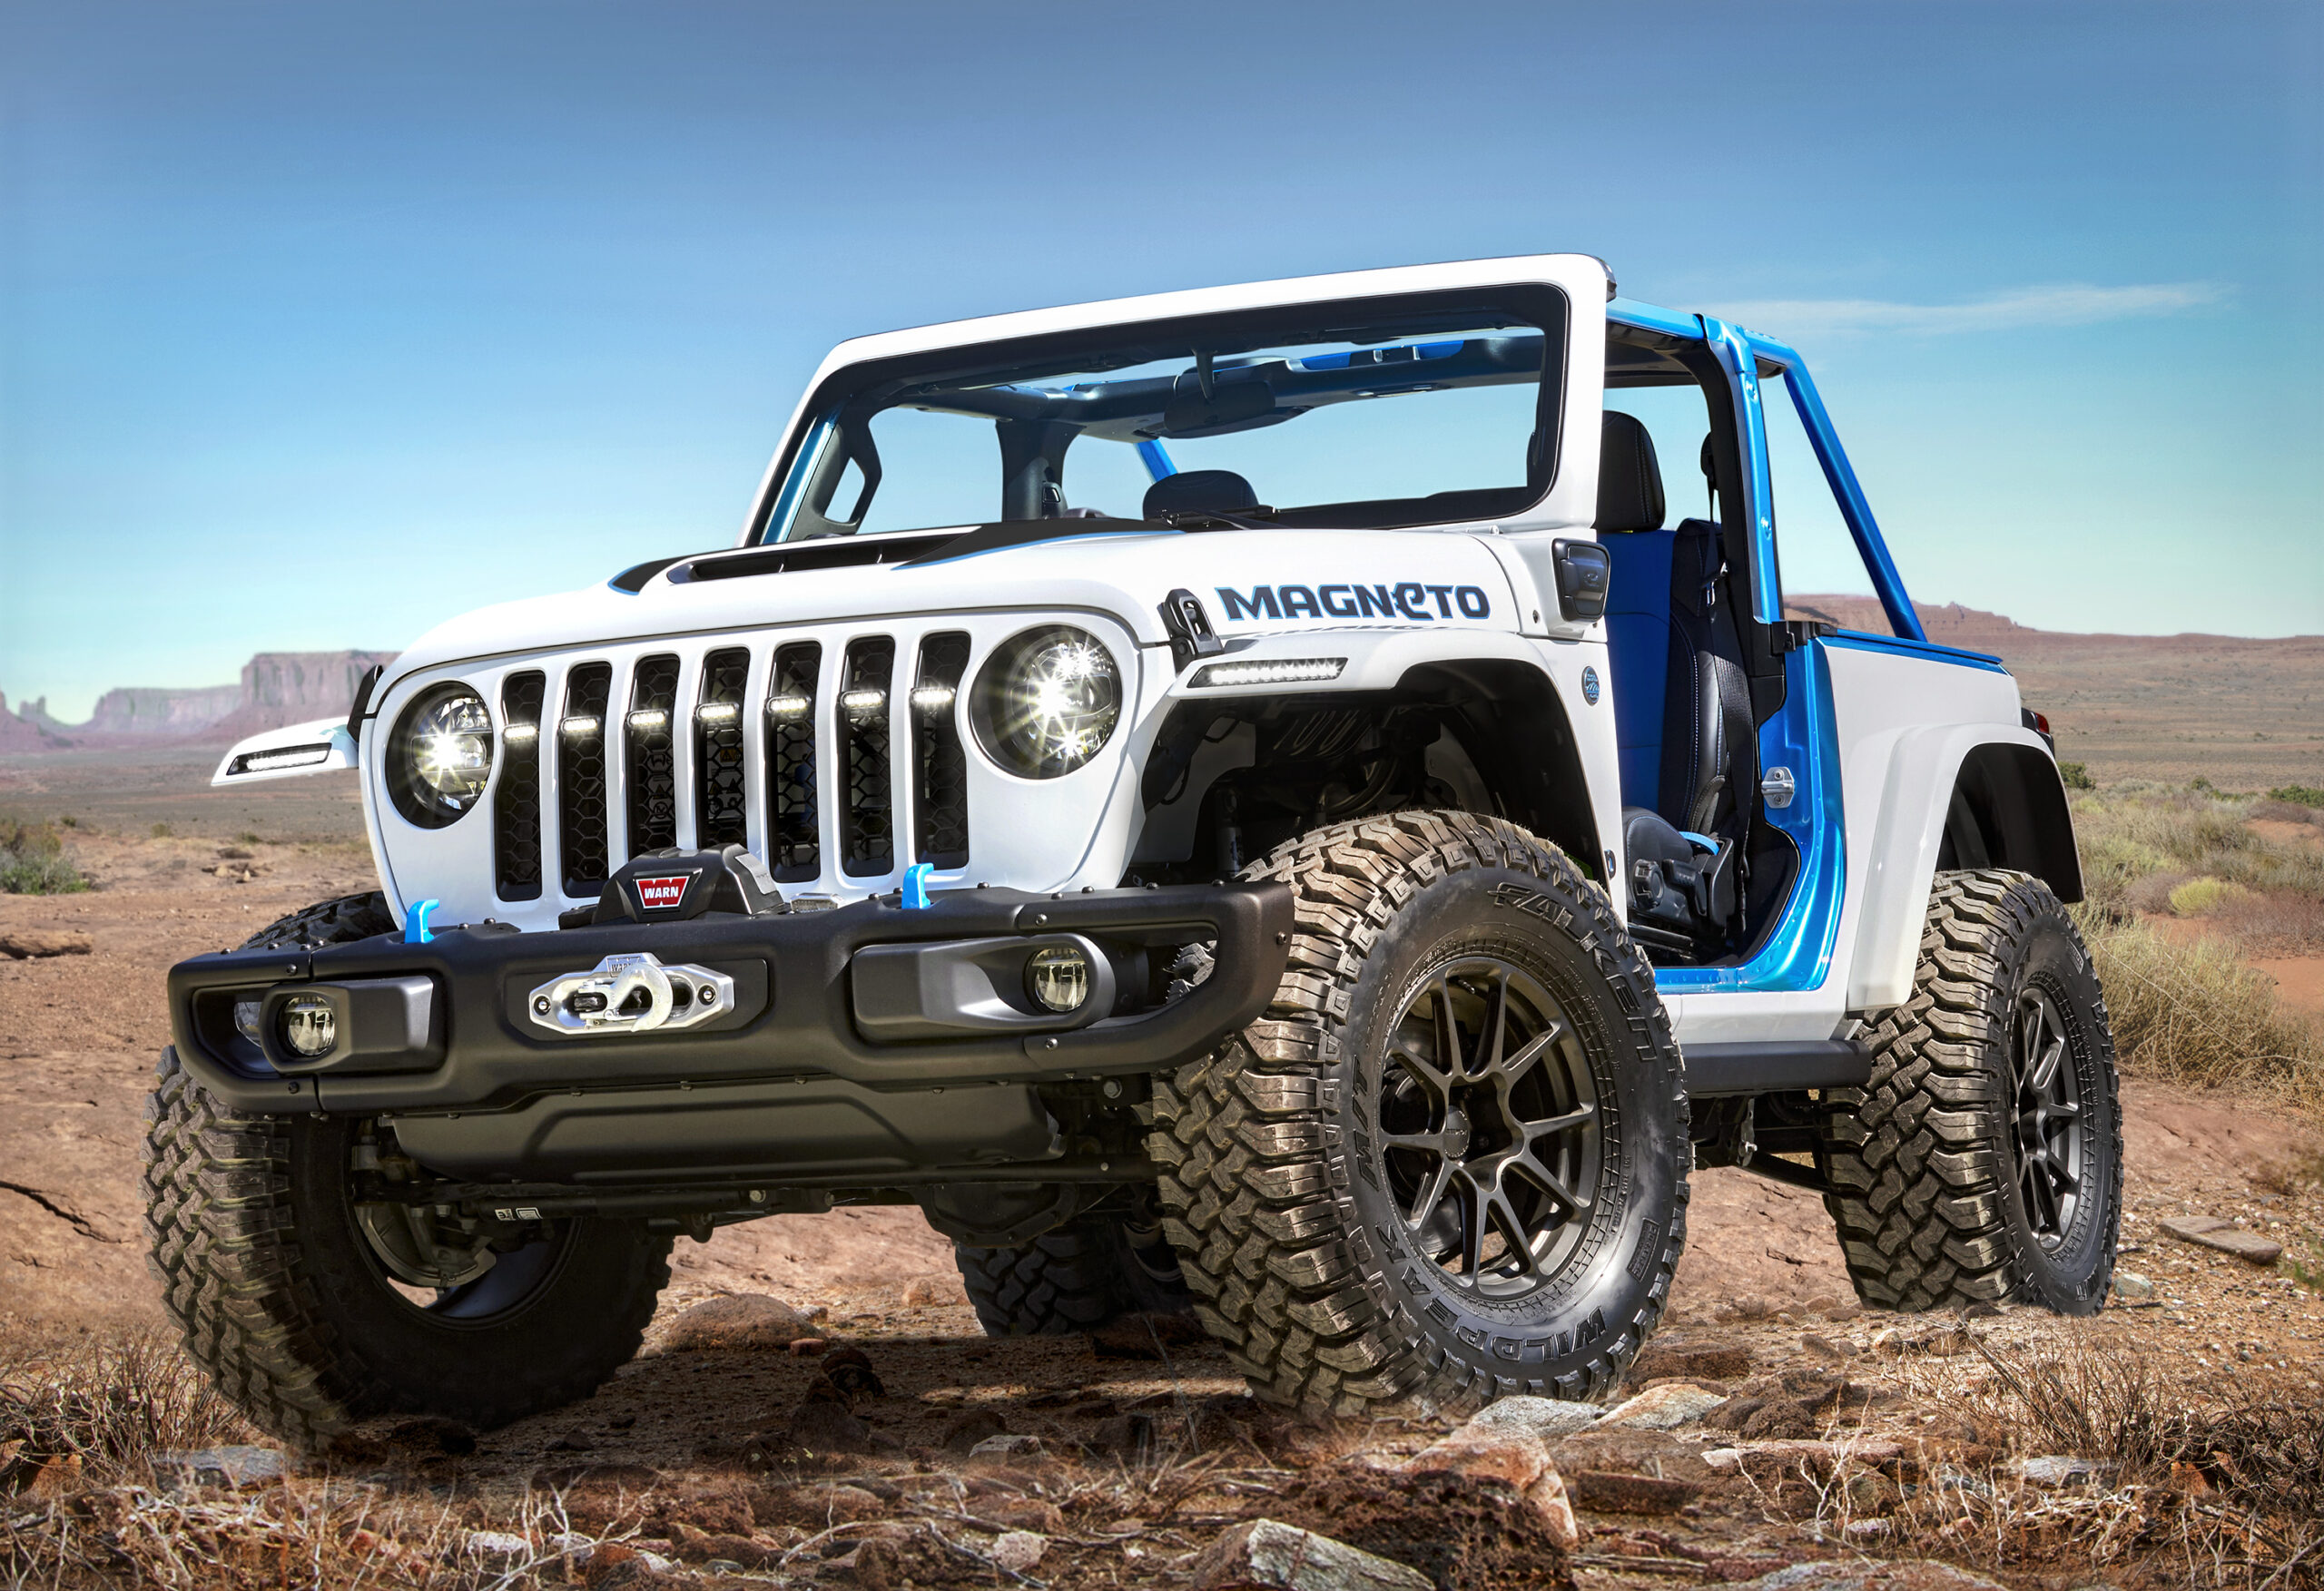 Jeep Magneto EV concept revealed for the 2021 Jeep Safari in Moab